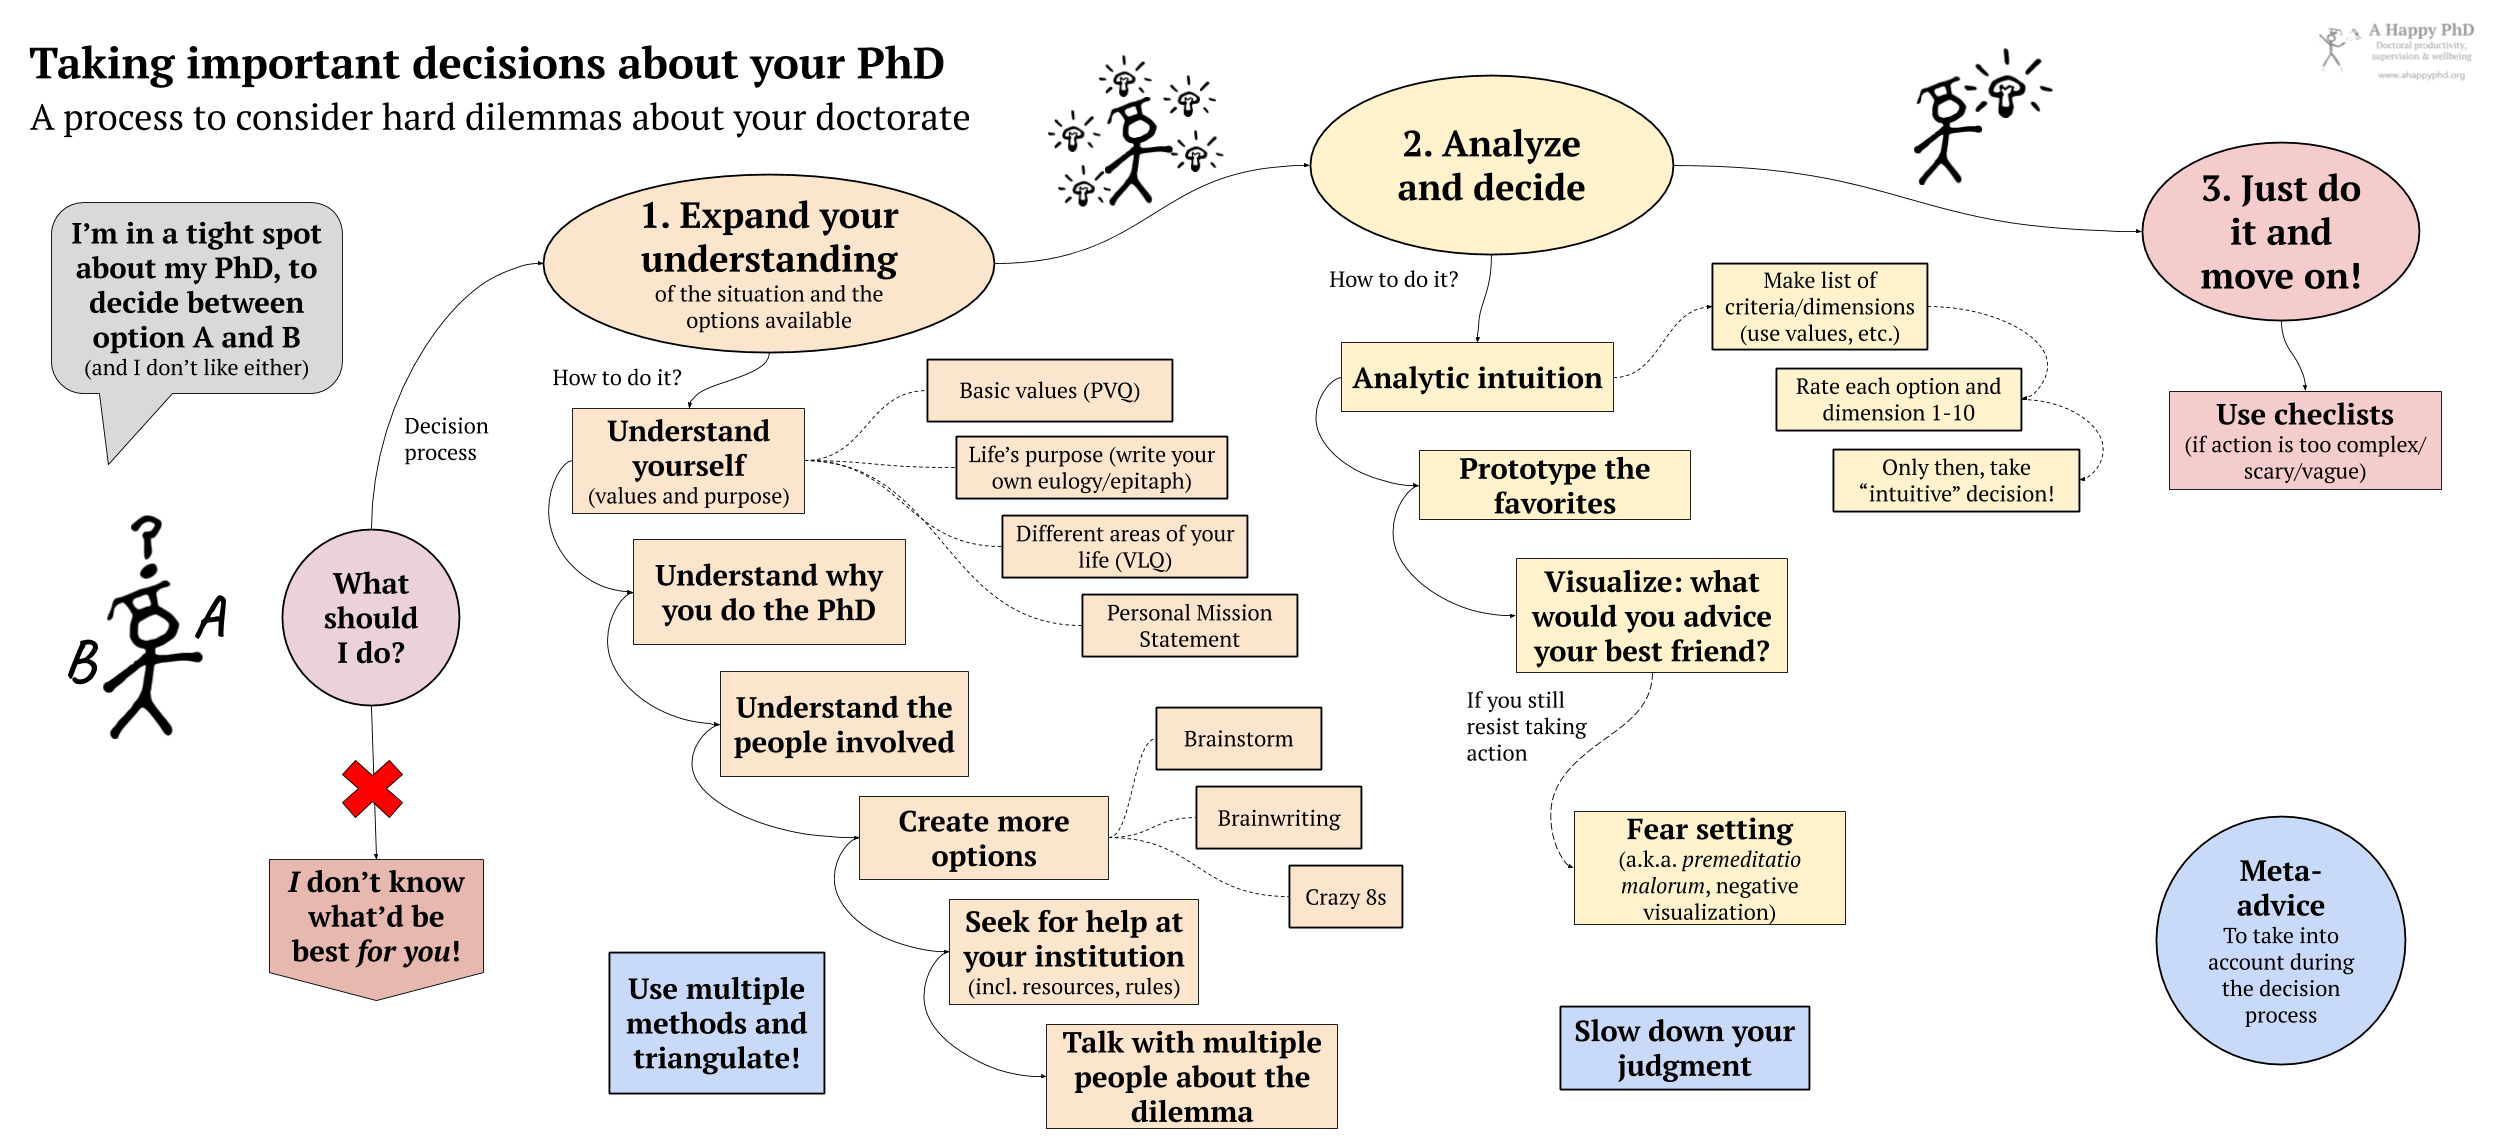 Diagram representing a decision process for important, hard dilemmas in the PhD